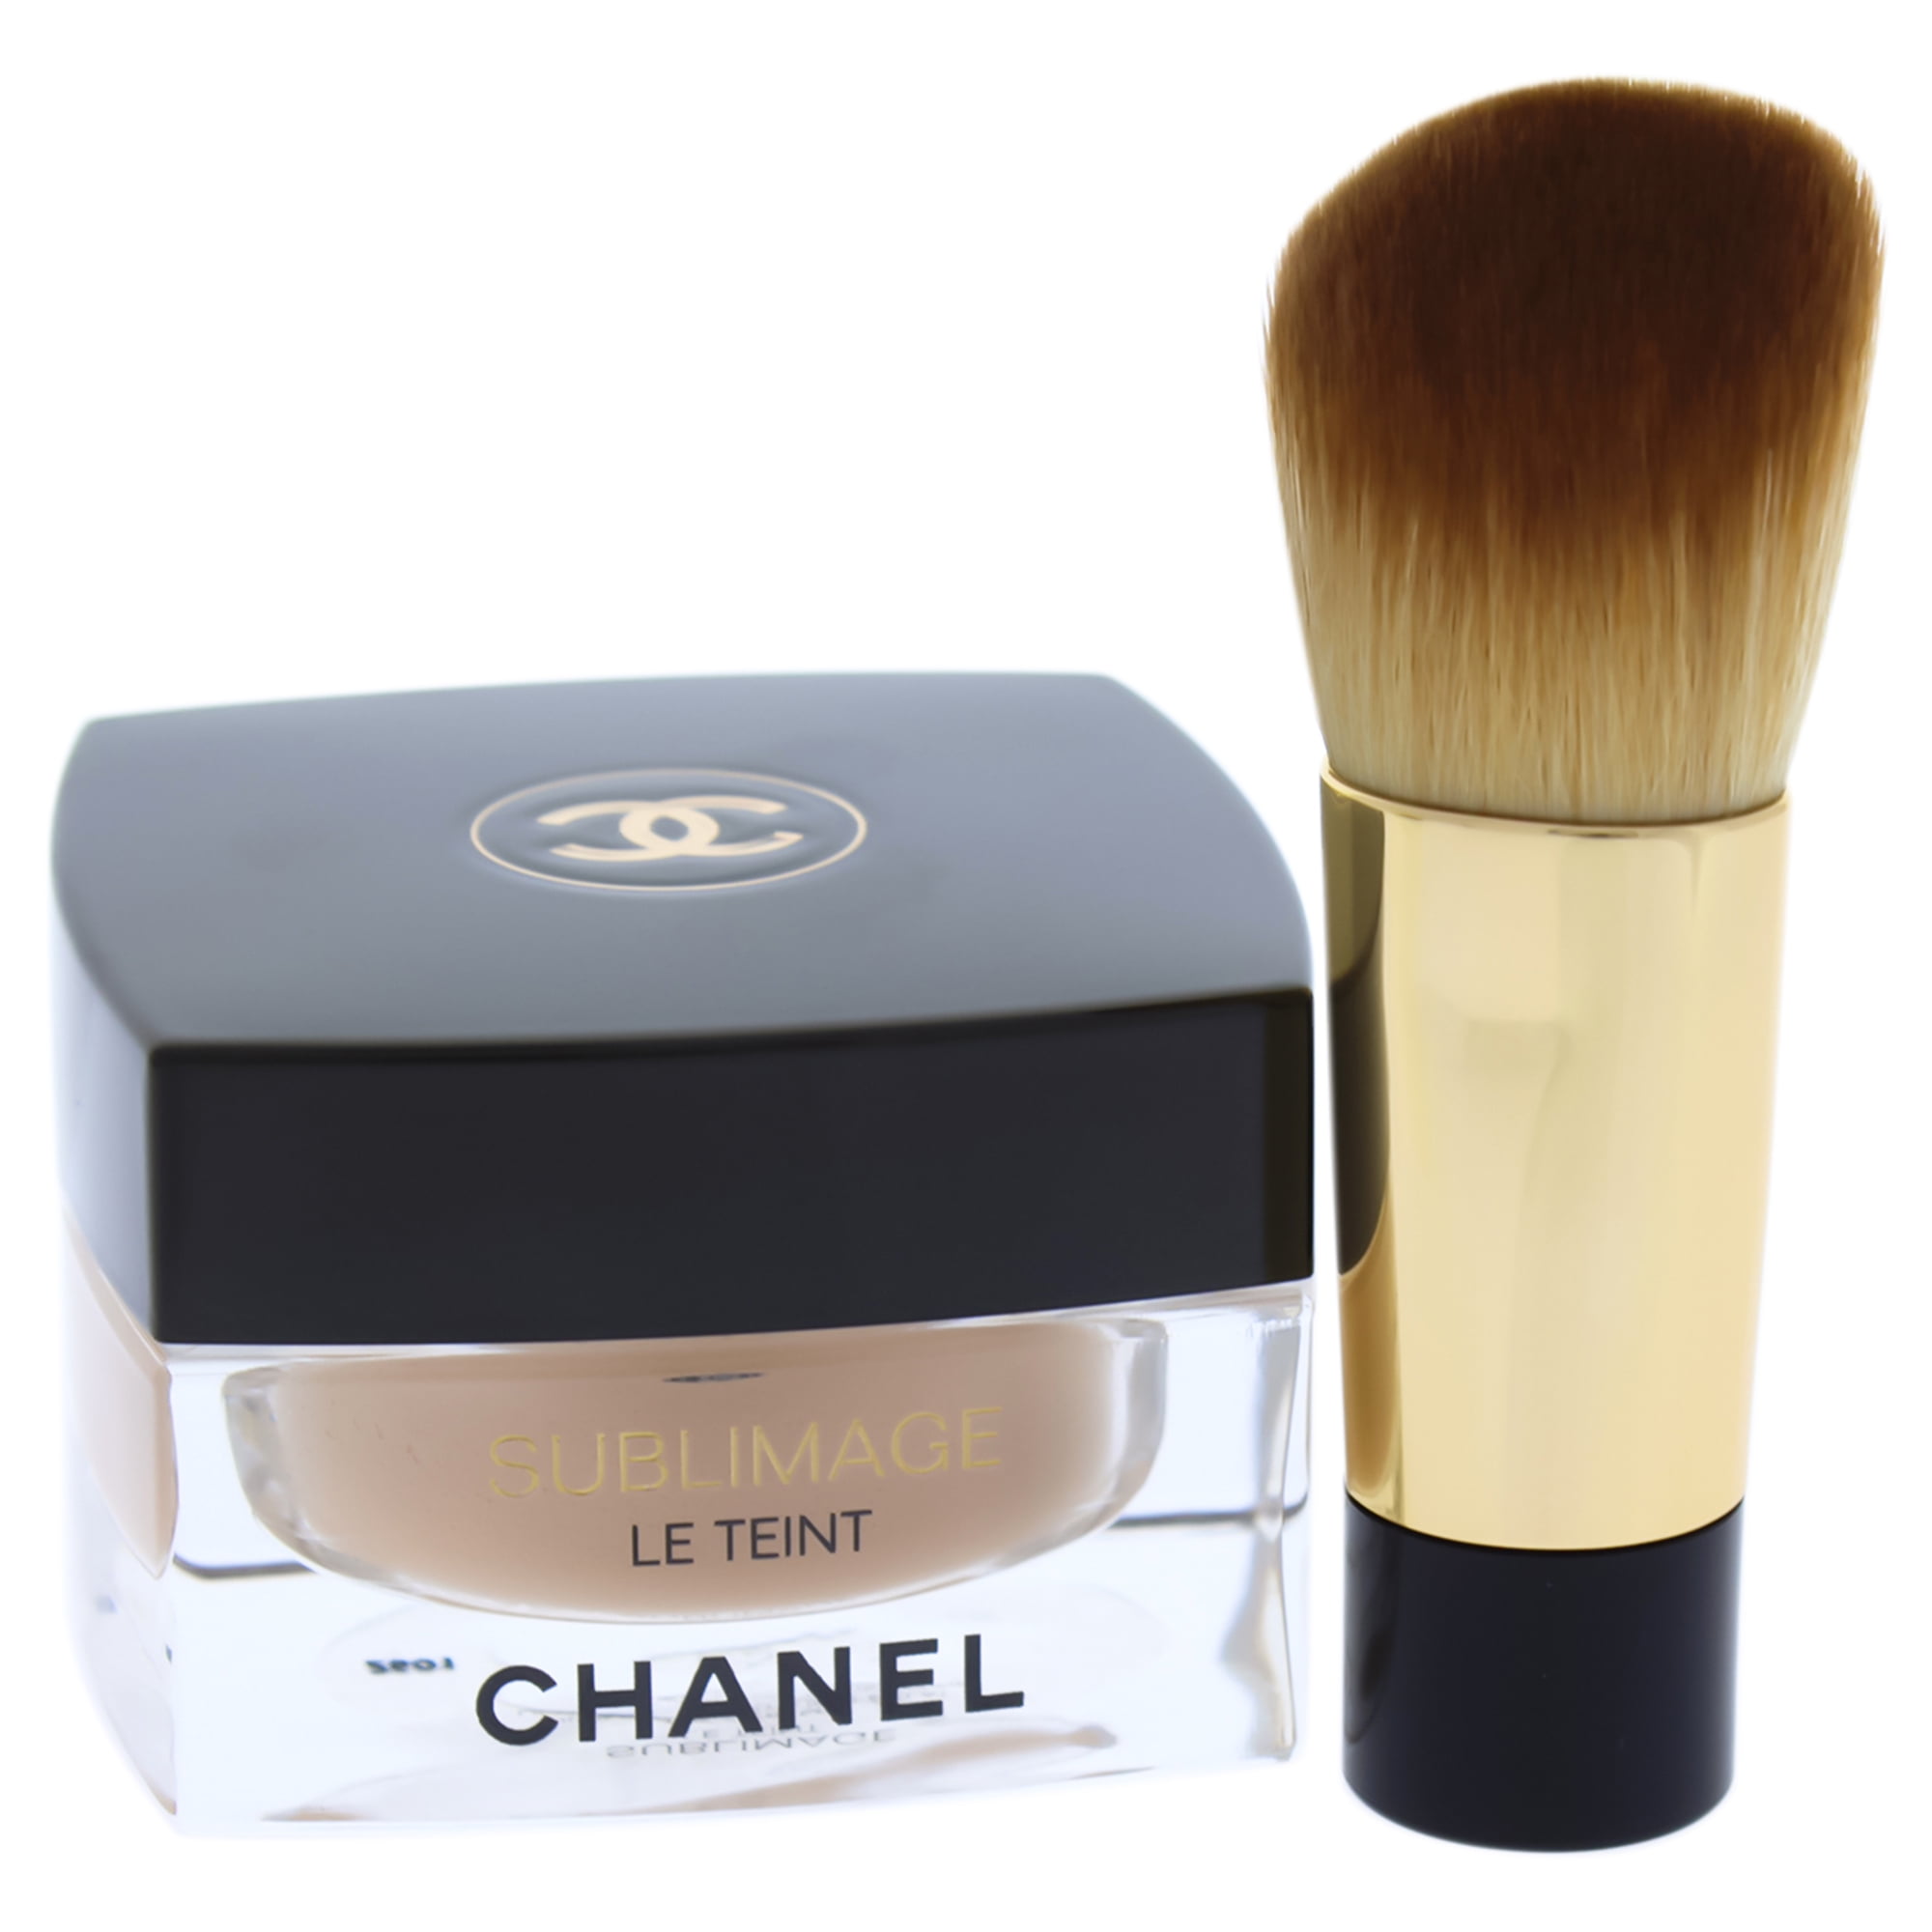 That's So Taupe on Instagram: New Chanel Sublimage Le Teint Foundation.  It's $135 at Nordstrom and comes in 13 shades. It's a lightweight foundation  with light-to-medium coverage. (📷 Photos via Chanel/Nordstrom)